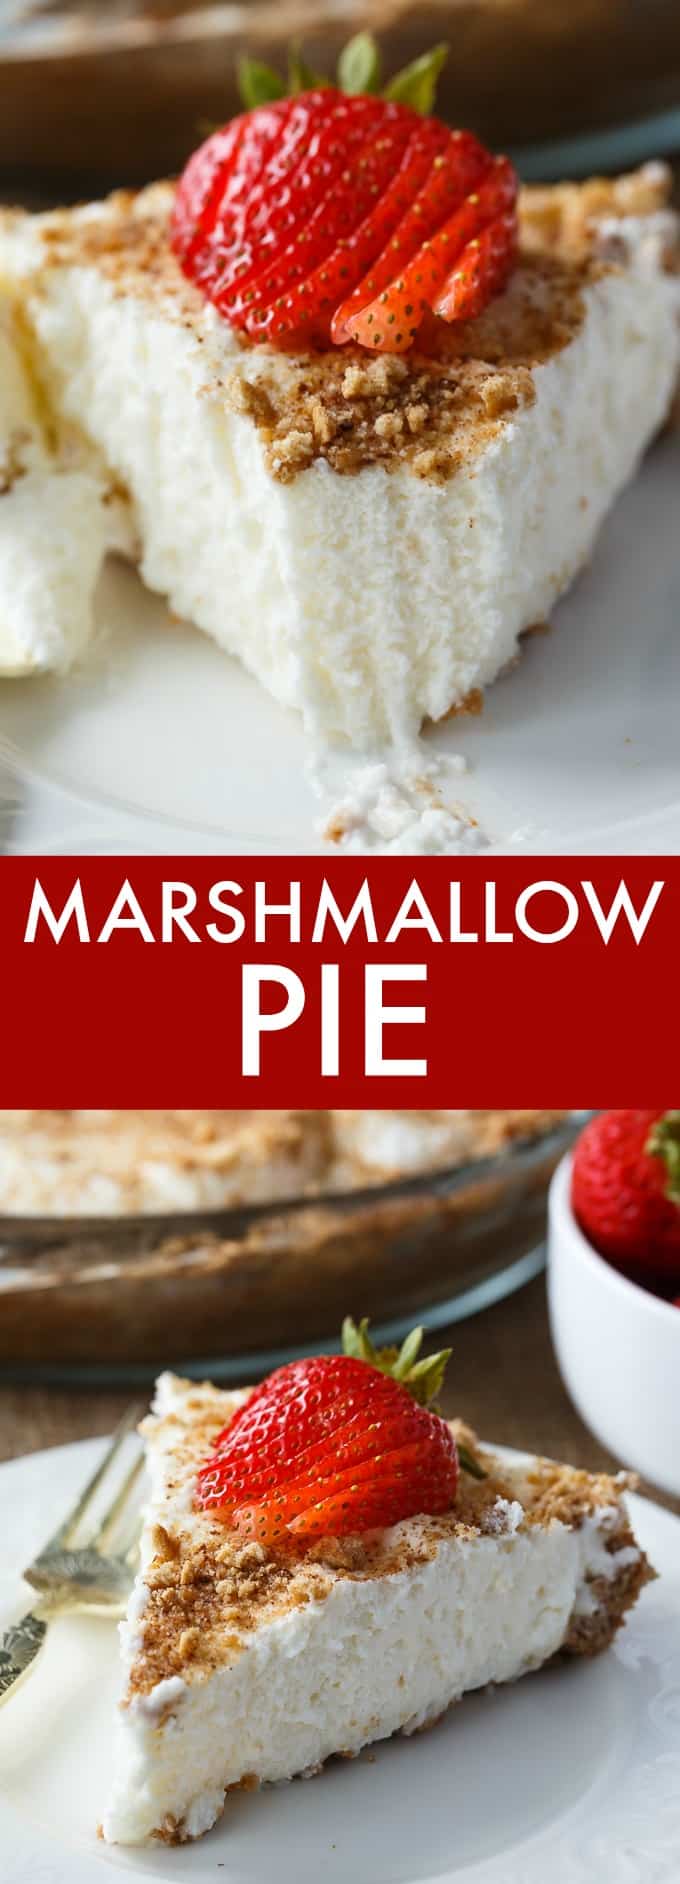 Marshmallow Pie - The perfect no-bake dessert! Super fluffy and extra easy with a sweet toasty marshmallow flavor.